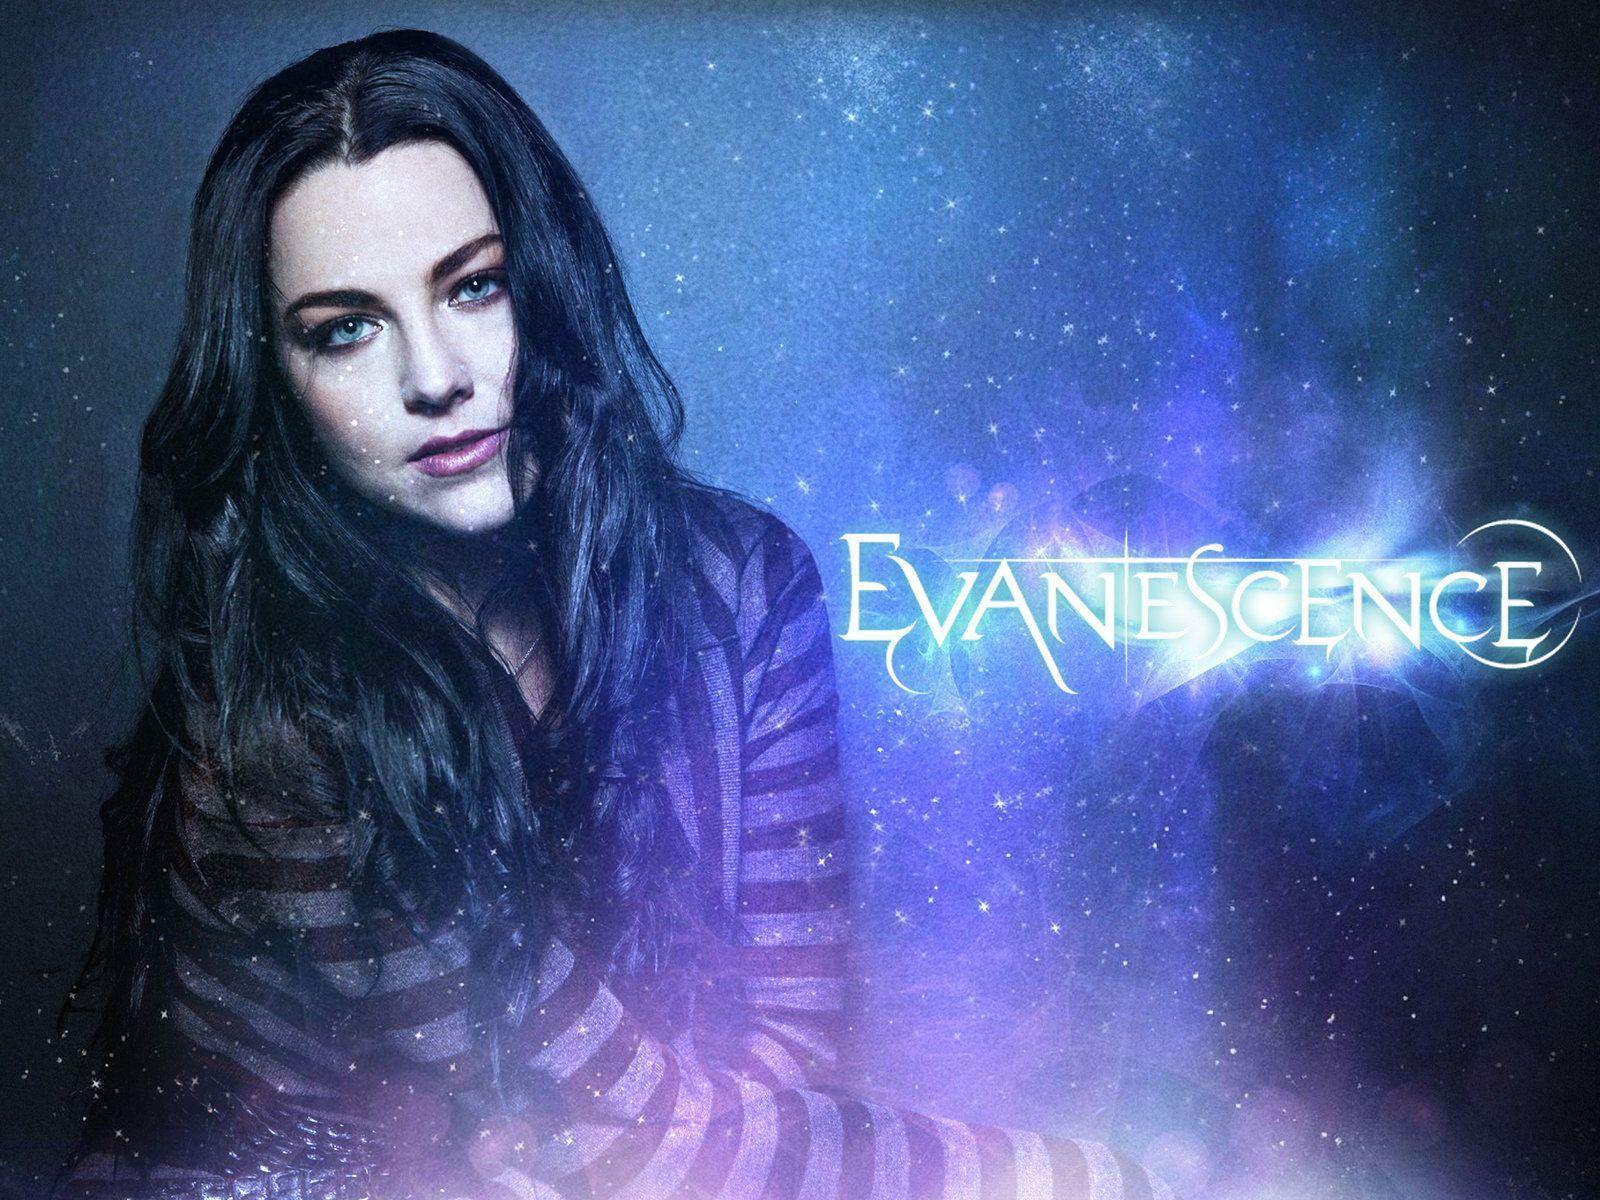 Evanescence Wallpapers 2015 - Wallpaper Cave